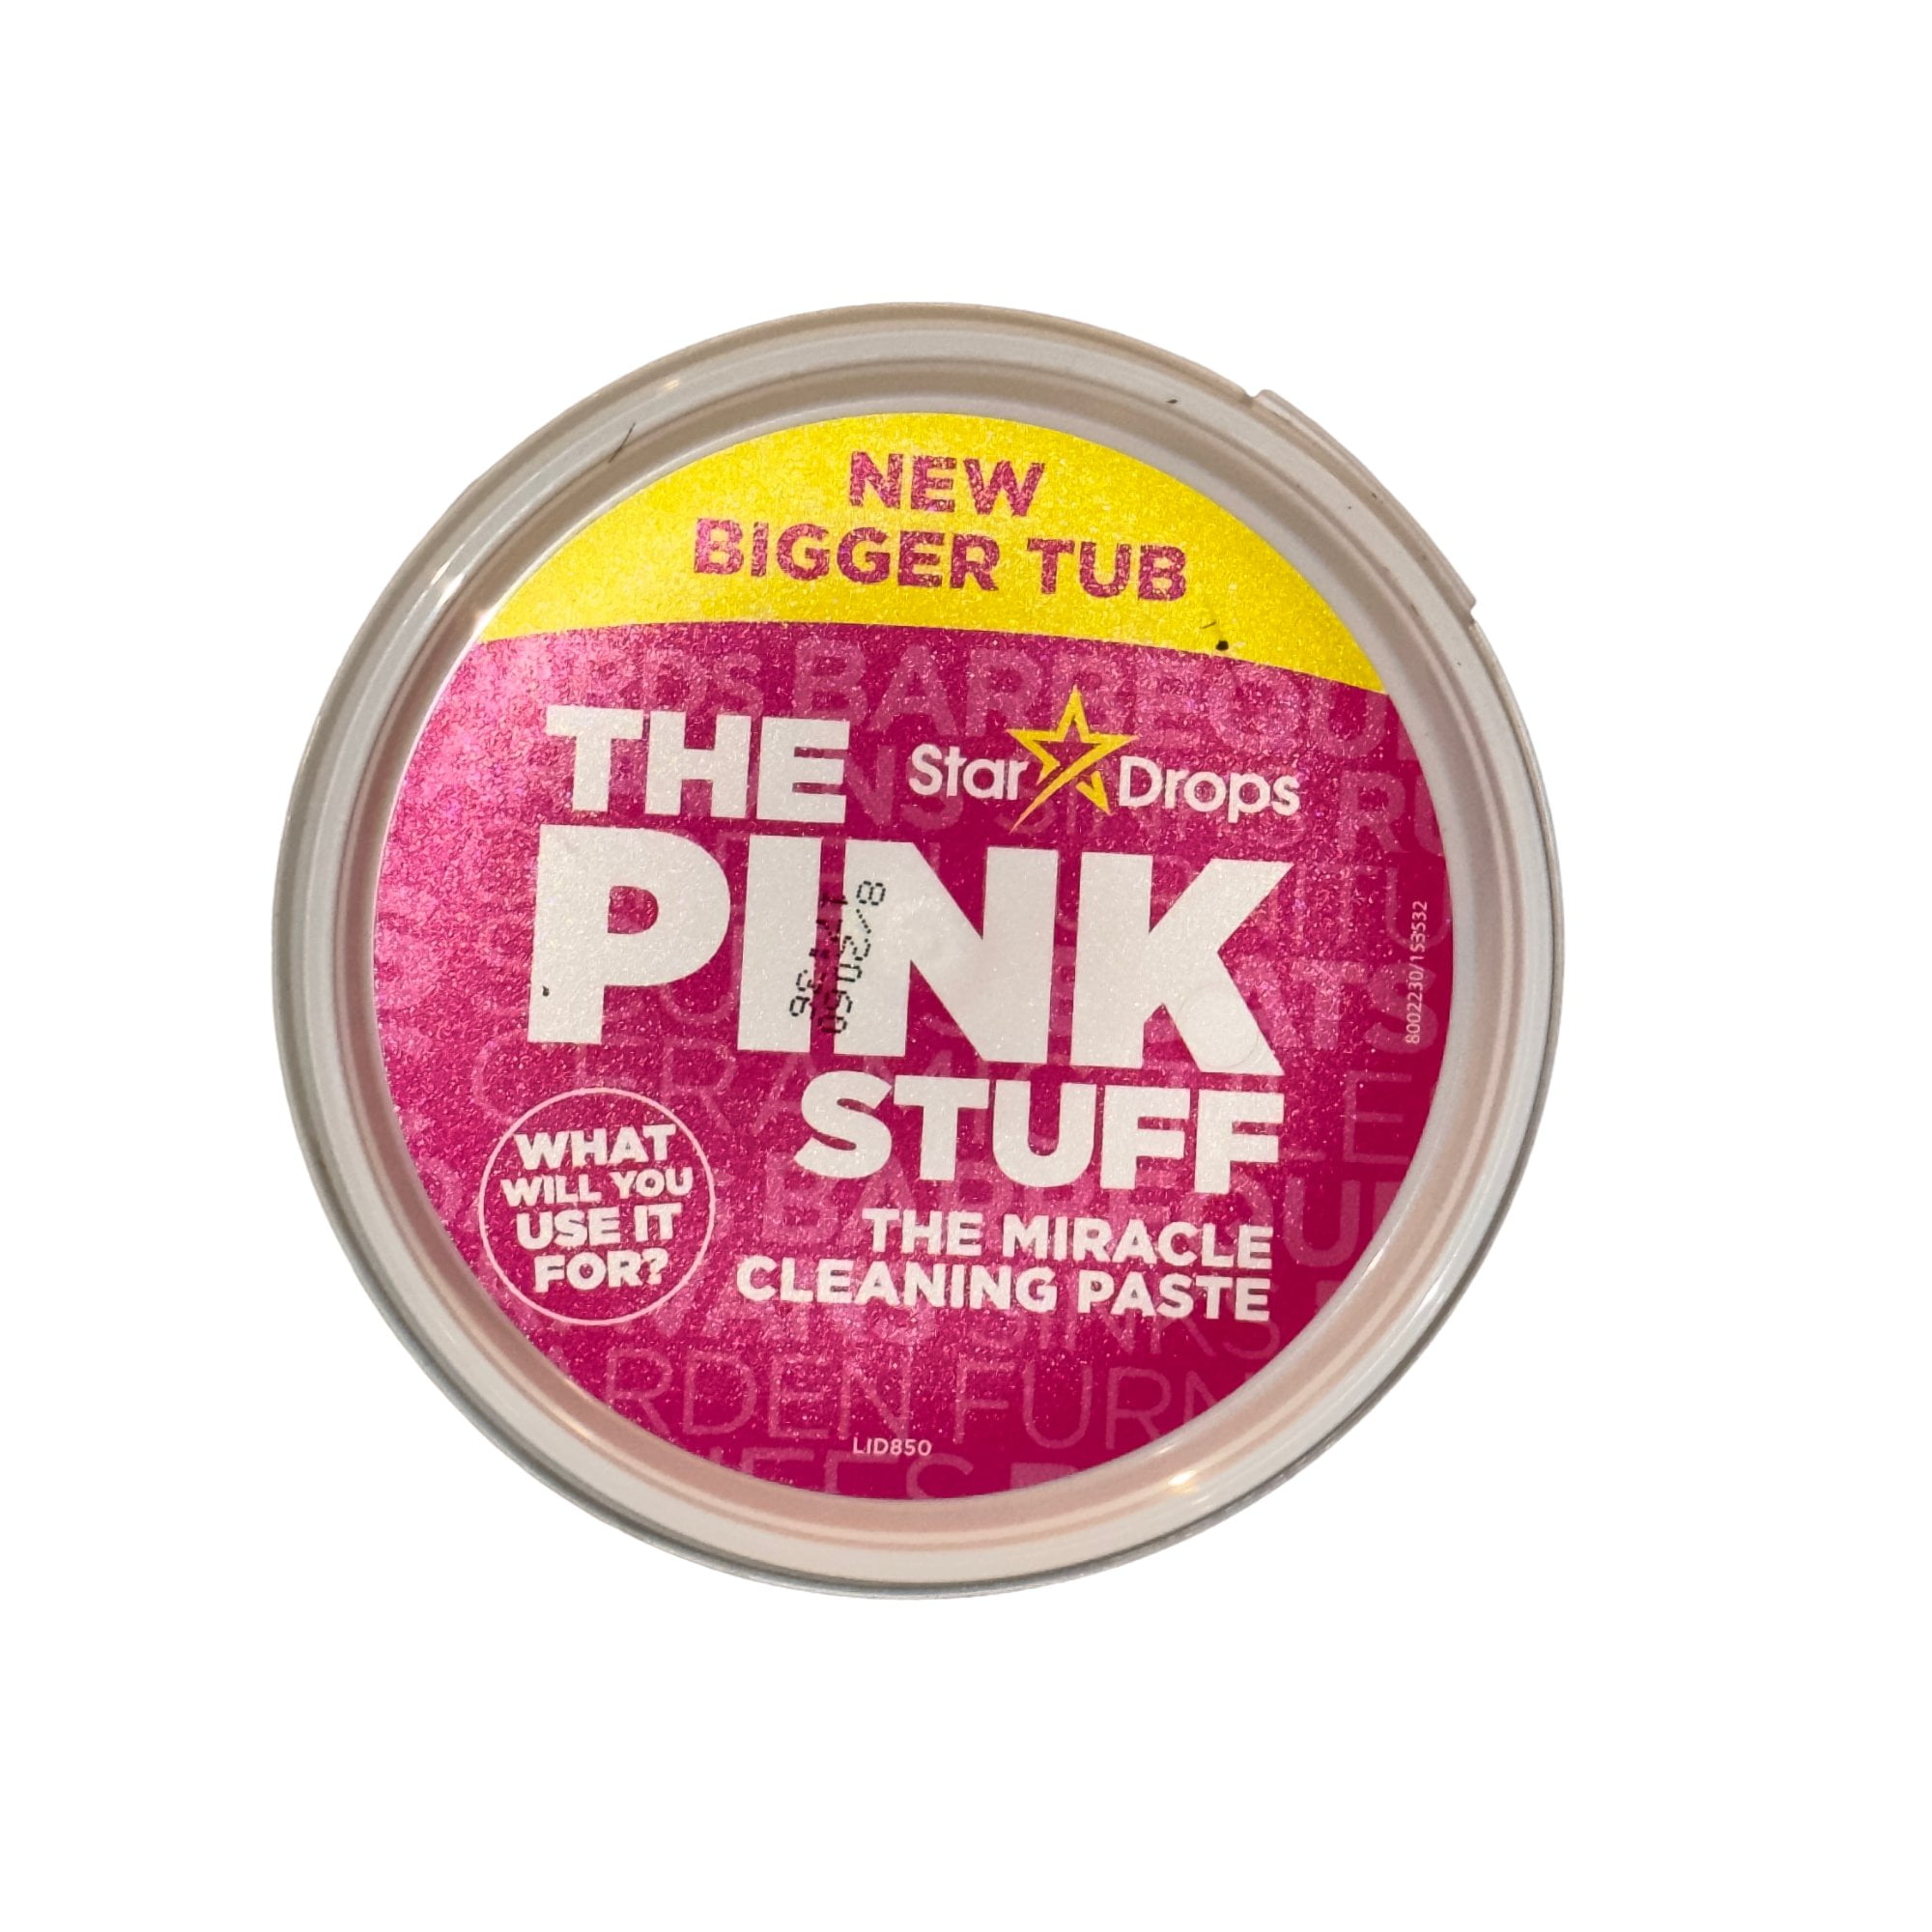 STARDROPS THE PINK STUFF - The Pink Stuff Cleaning Paste 17.63